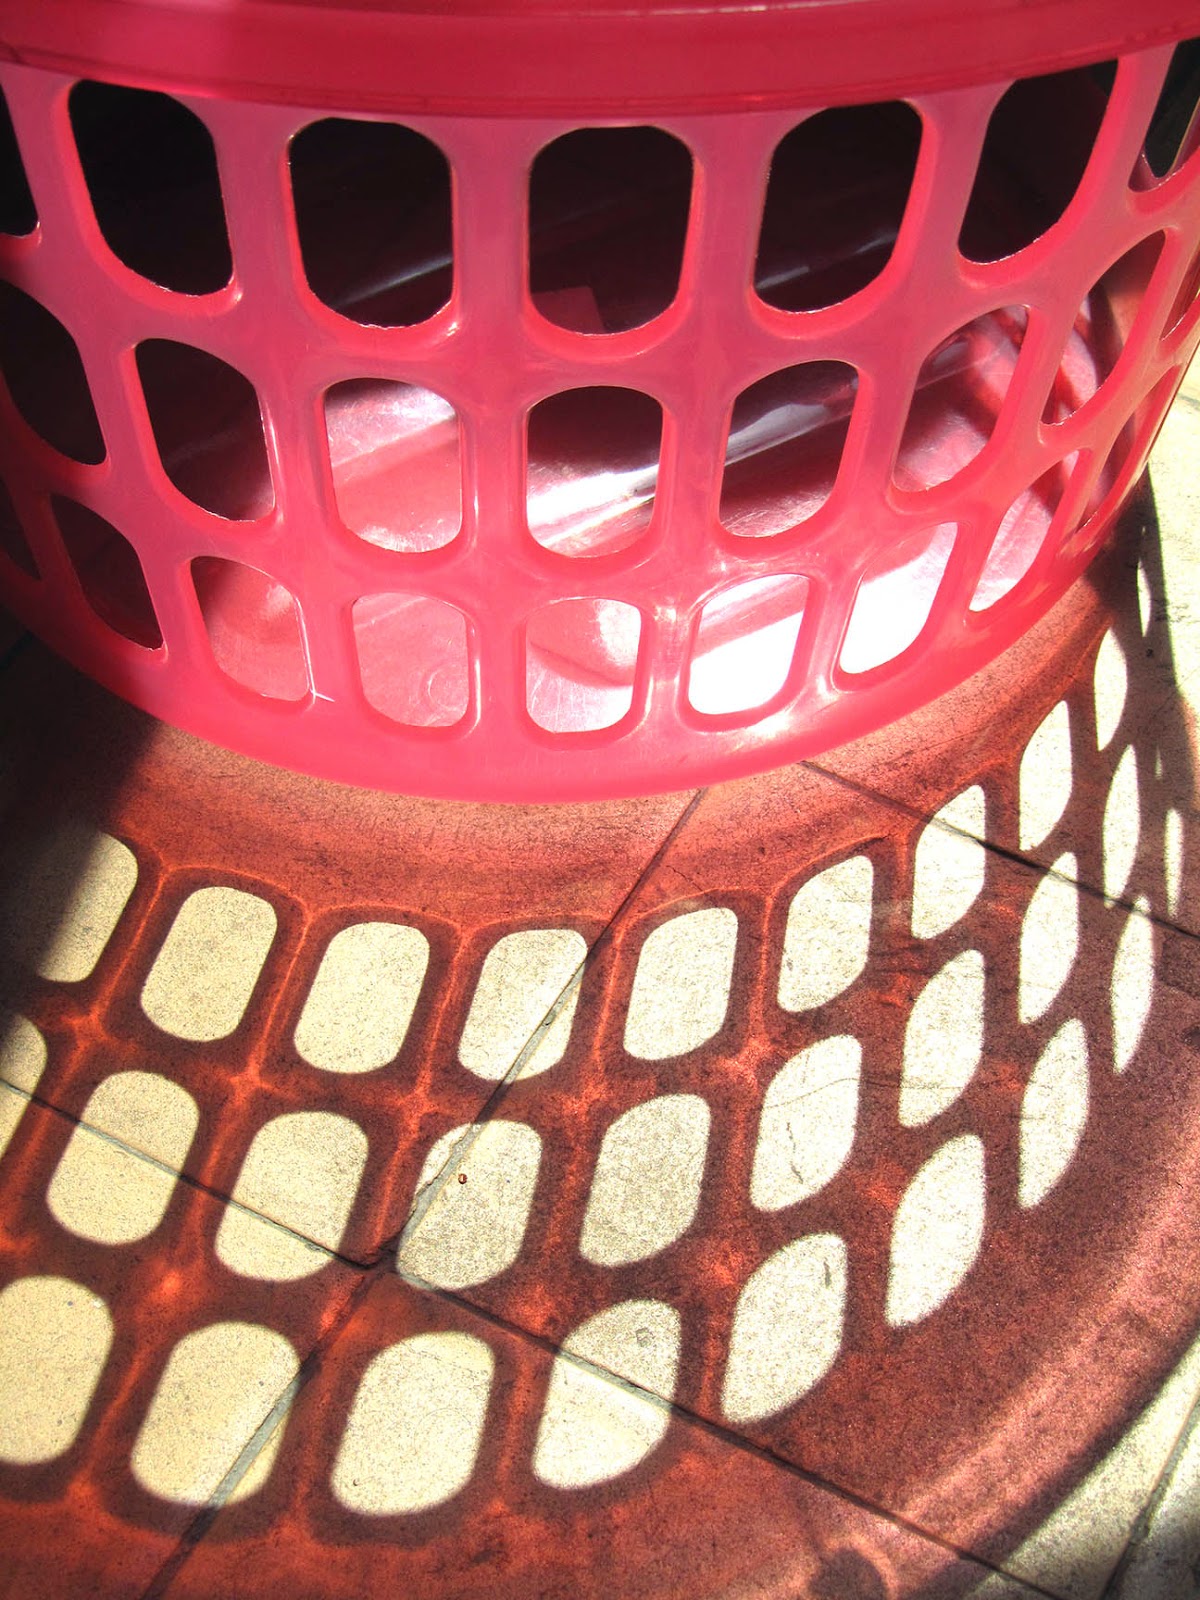 pink laundry basket with shadow